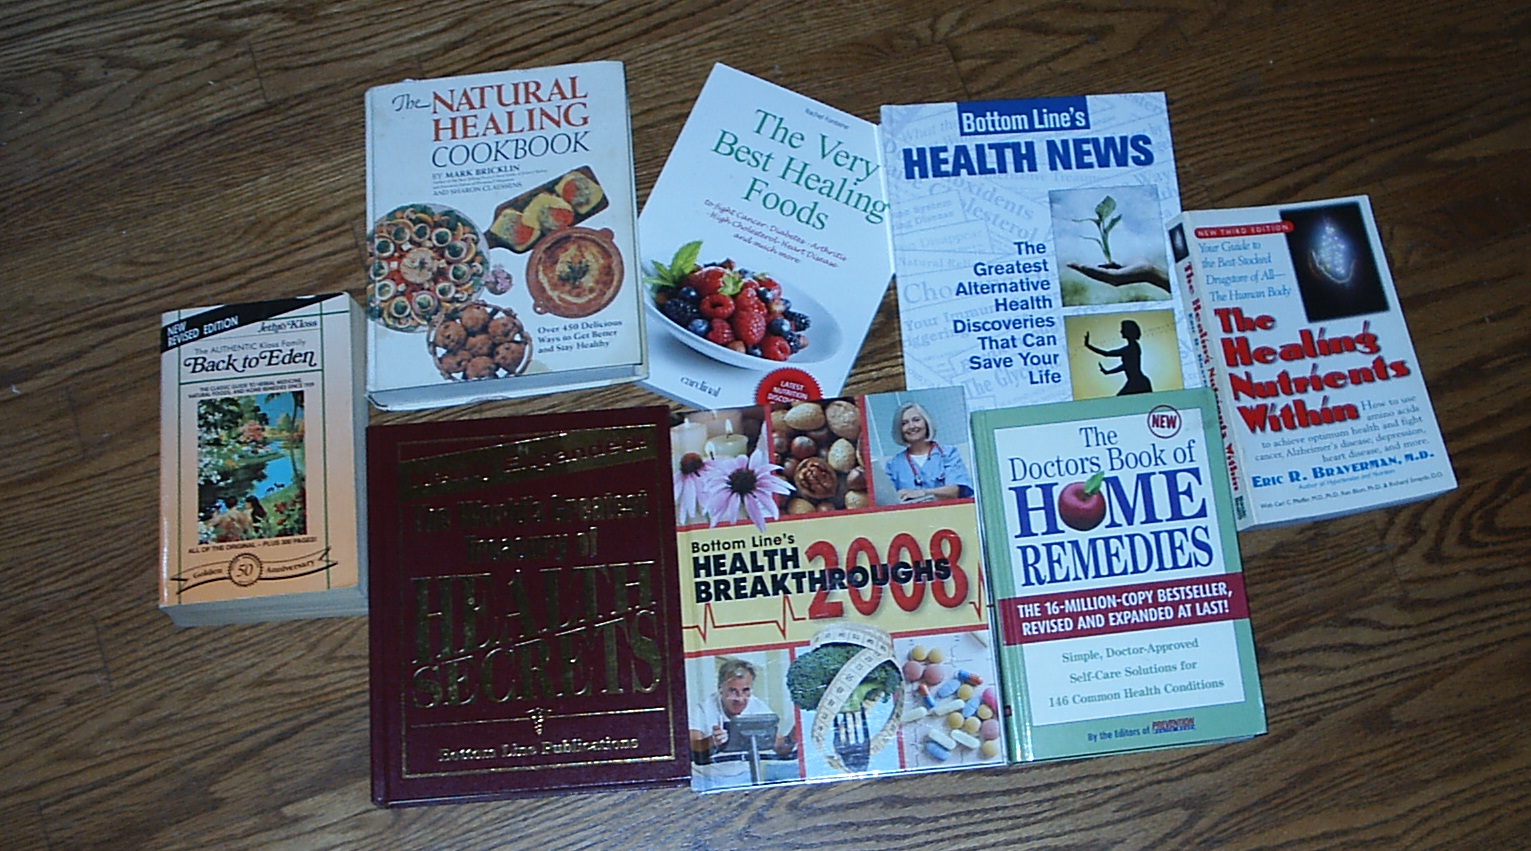 books related to Anti-aging